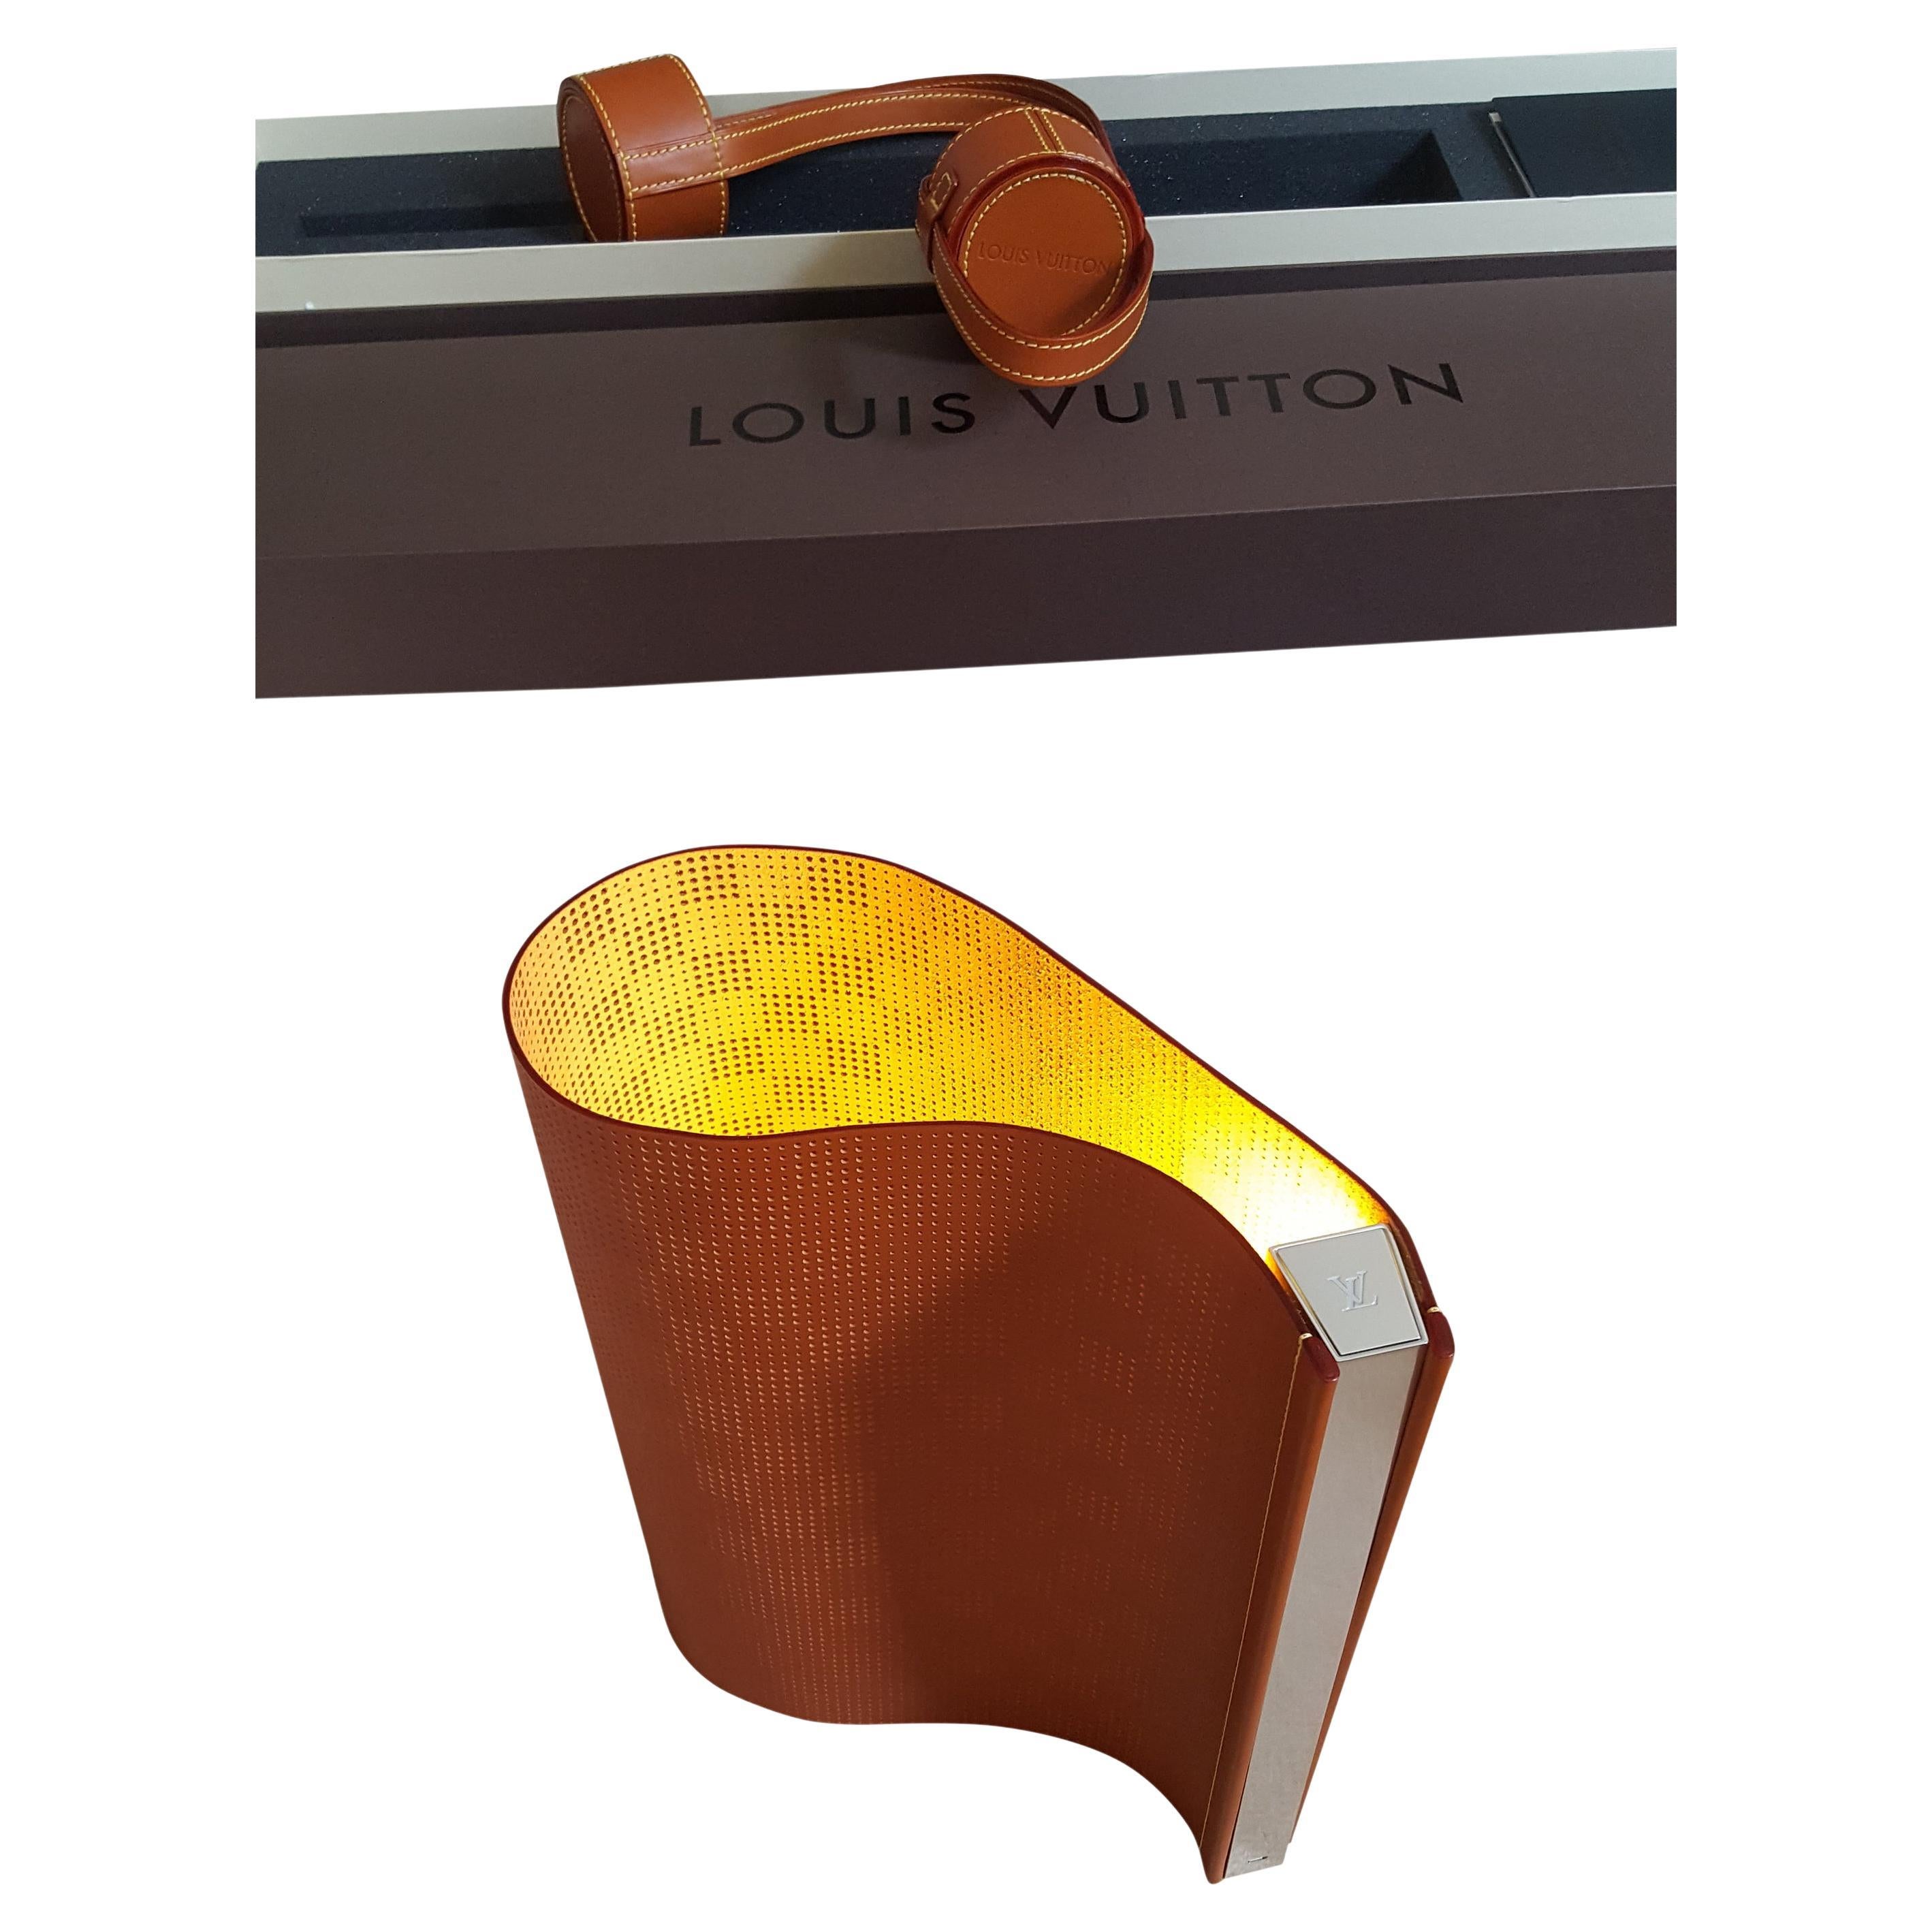 Louis Vuitton Surface Table Lamp 'Limited Edition by Nendo, Objets Nomades'